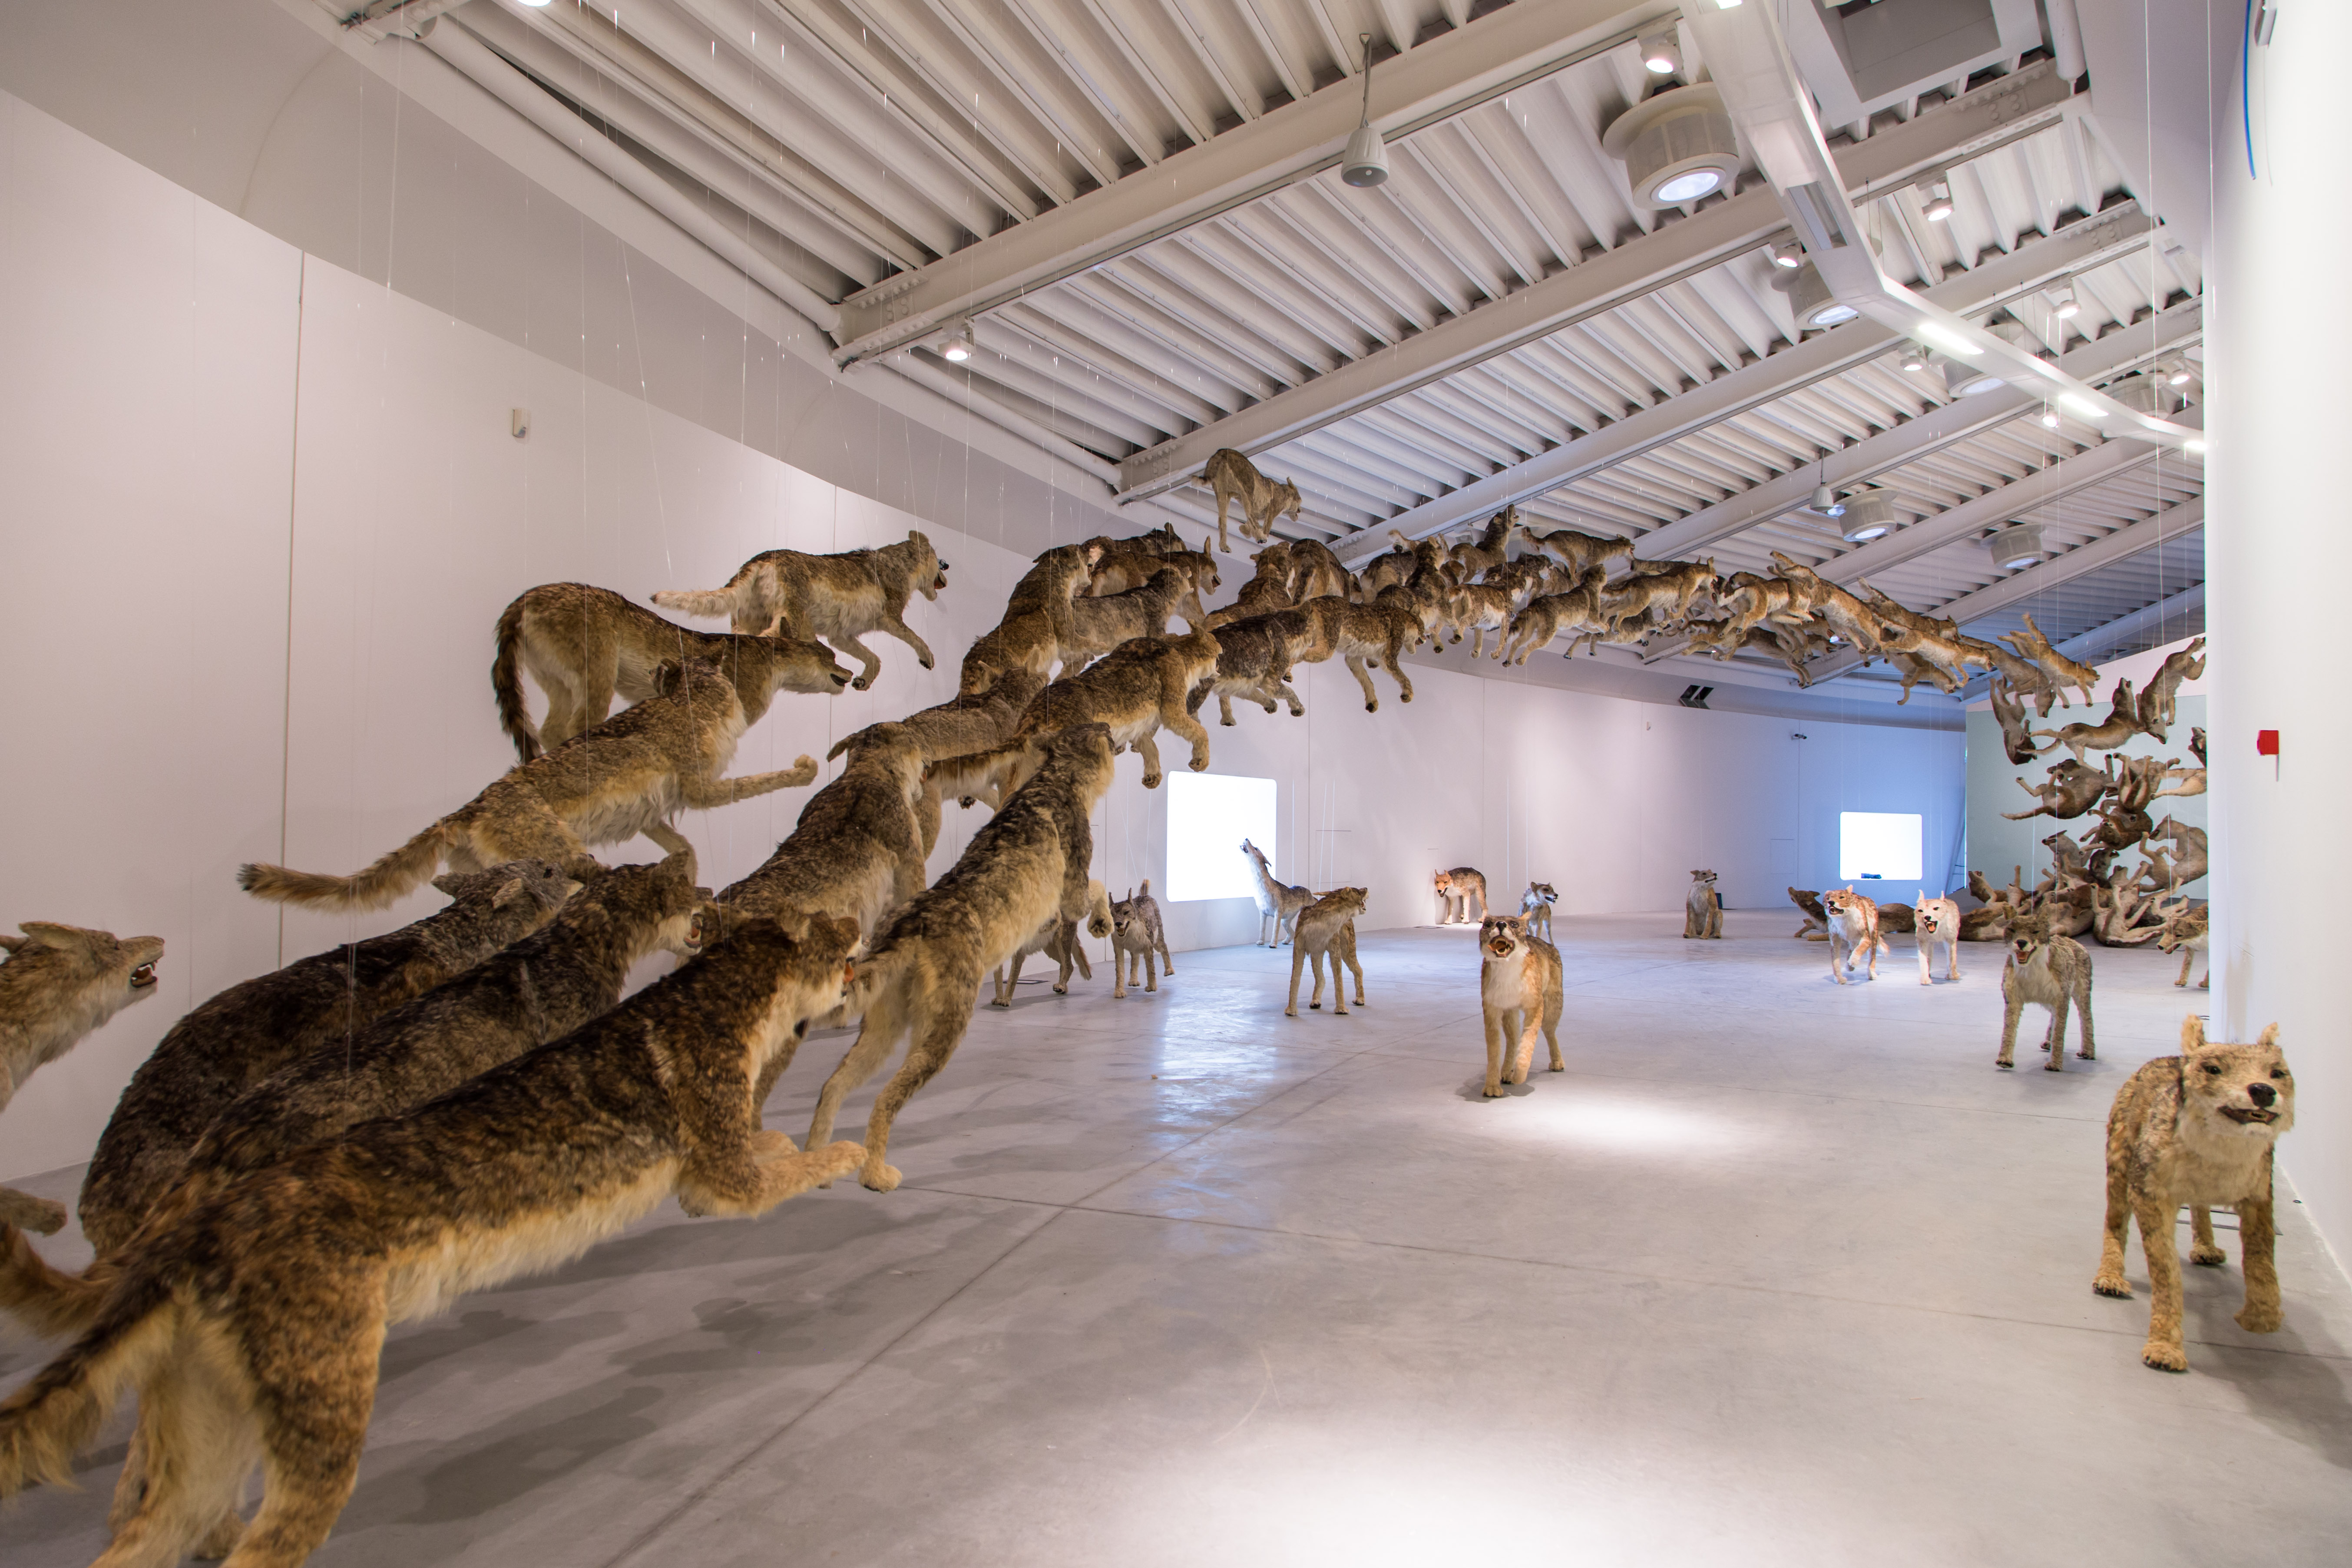 Cai Guo-Qiang’s Head On – 99 wolves crash into a glass wall